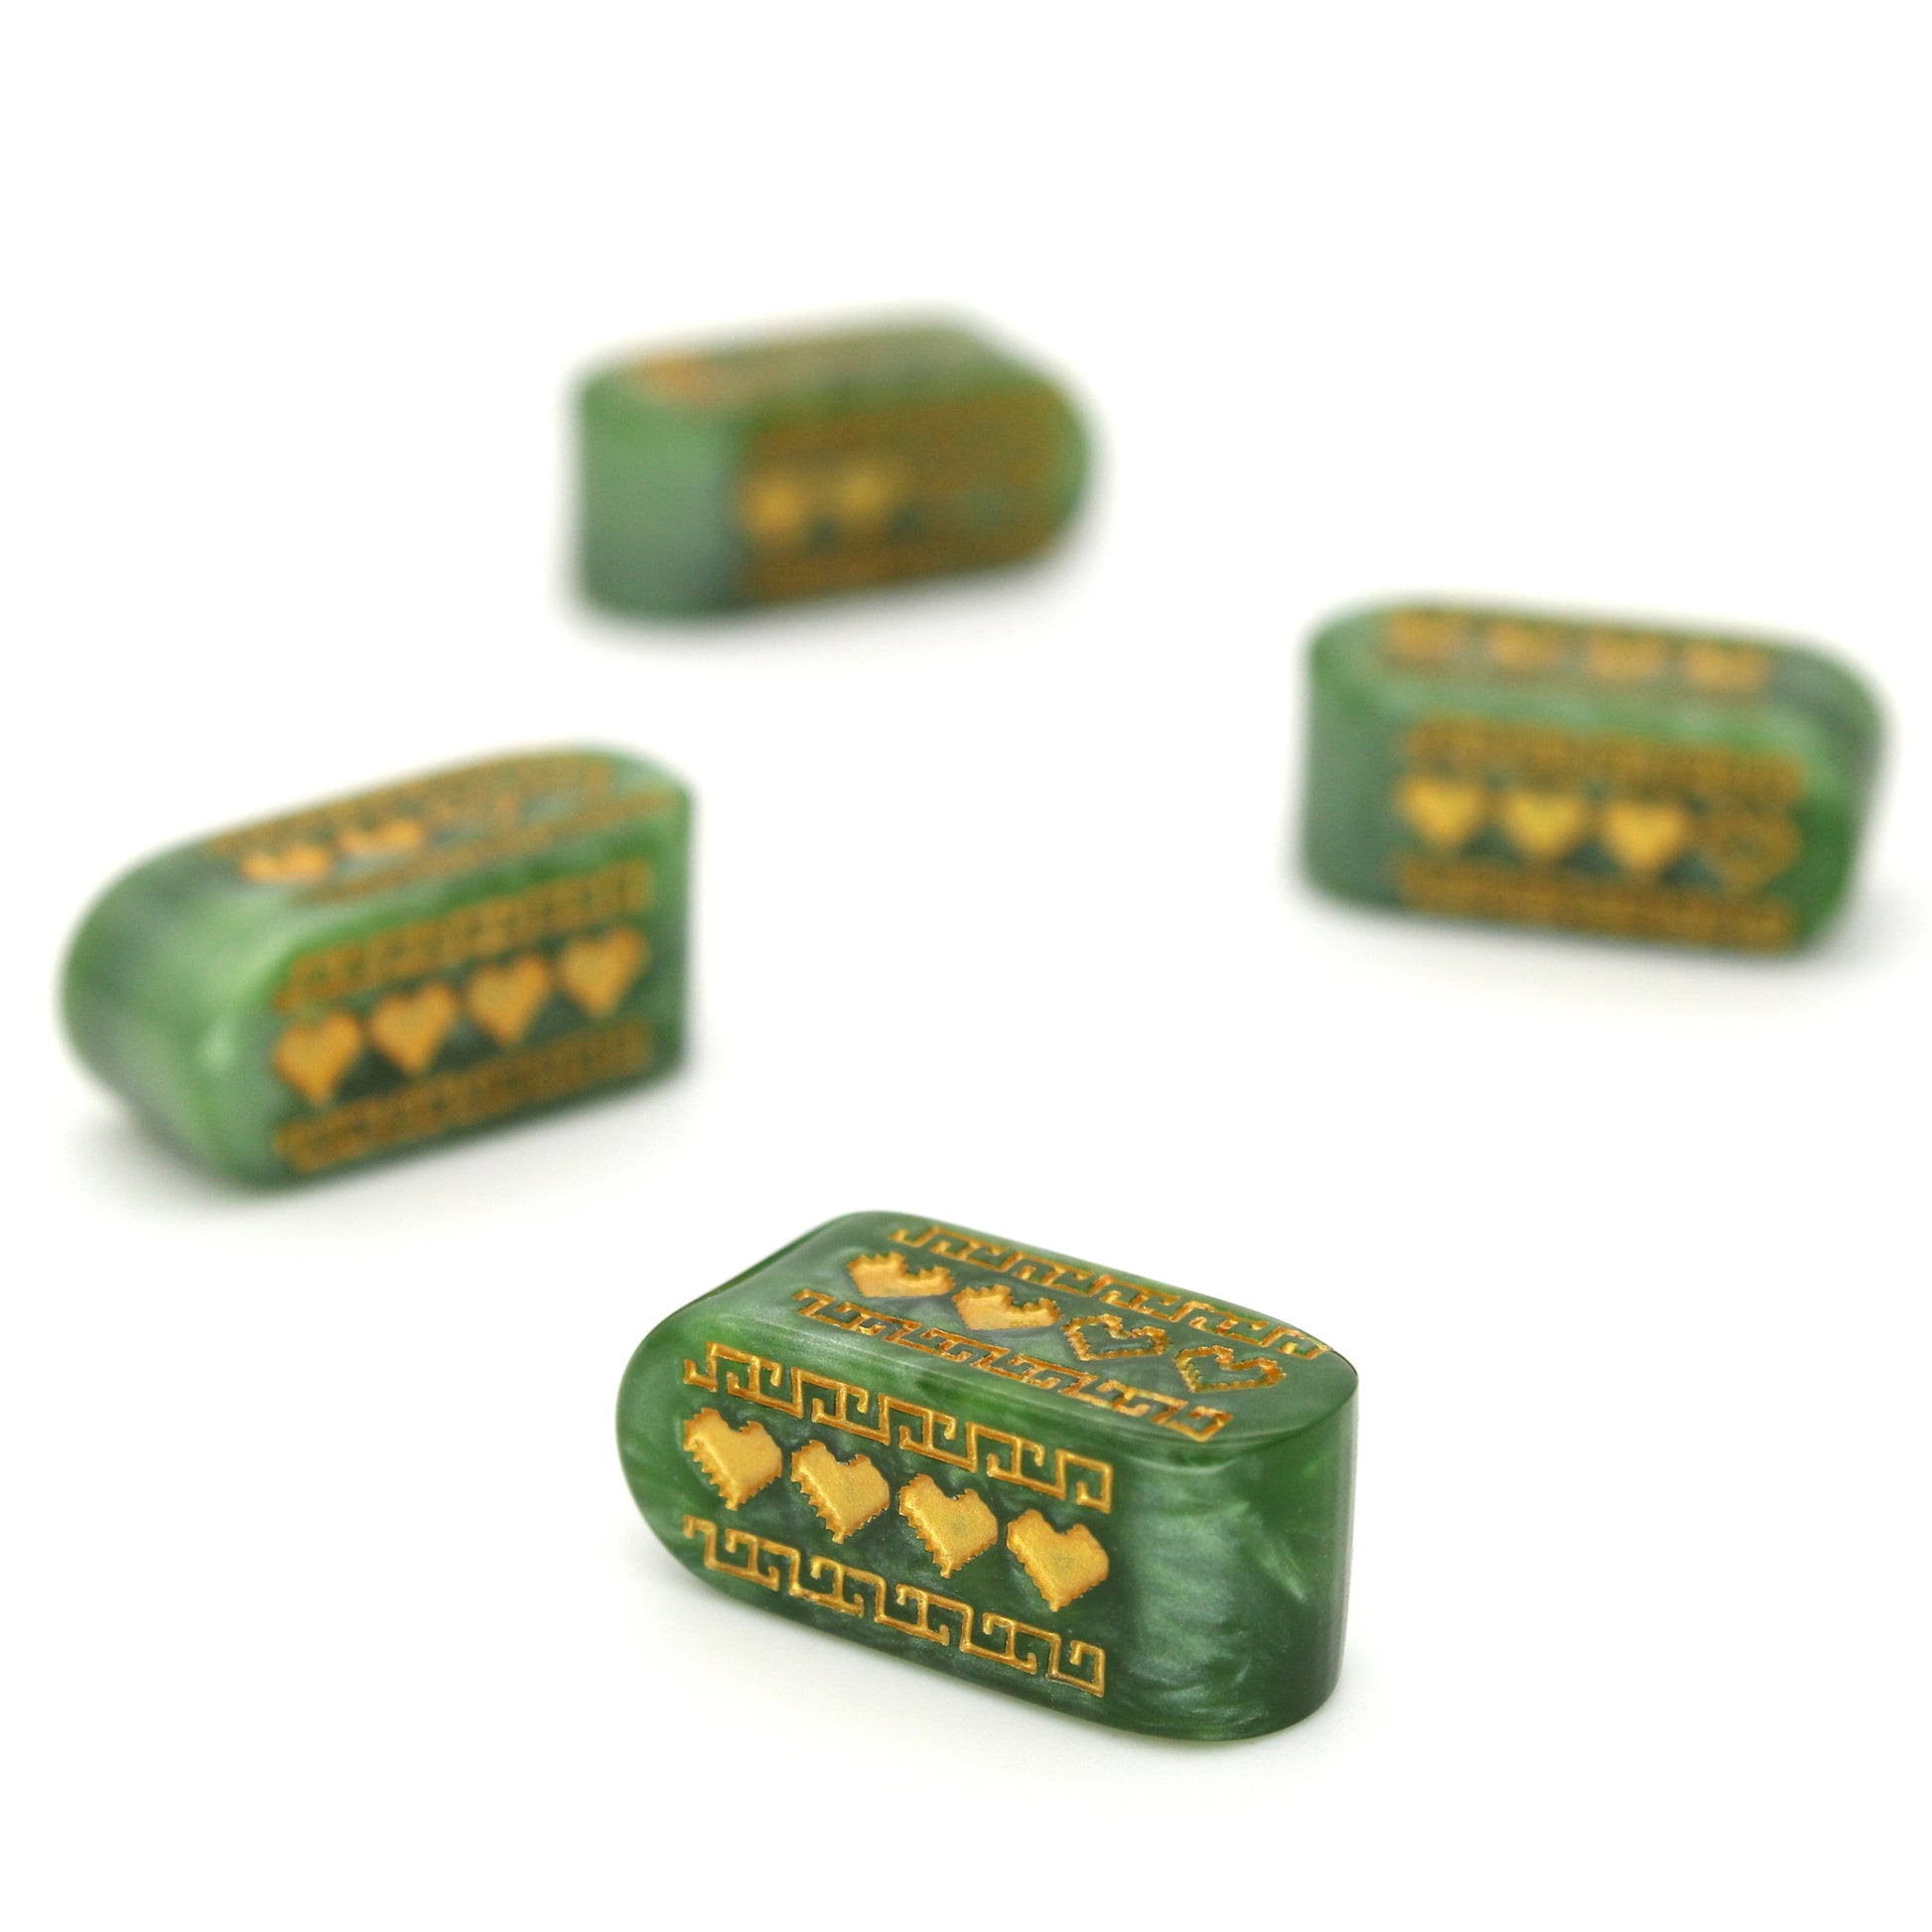 Pixel Hearts: Hylian are custom marbled green resin Infinity d4s inked in gold.